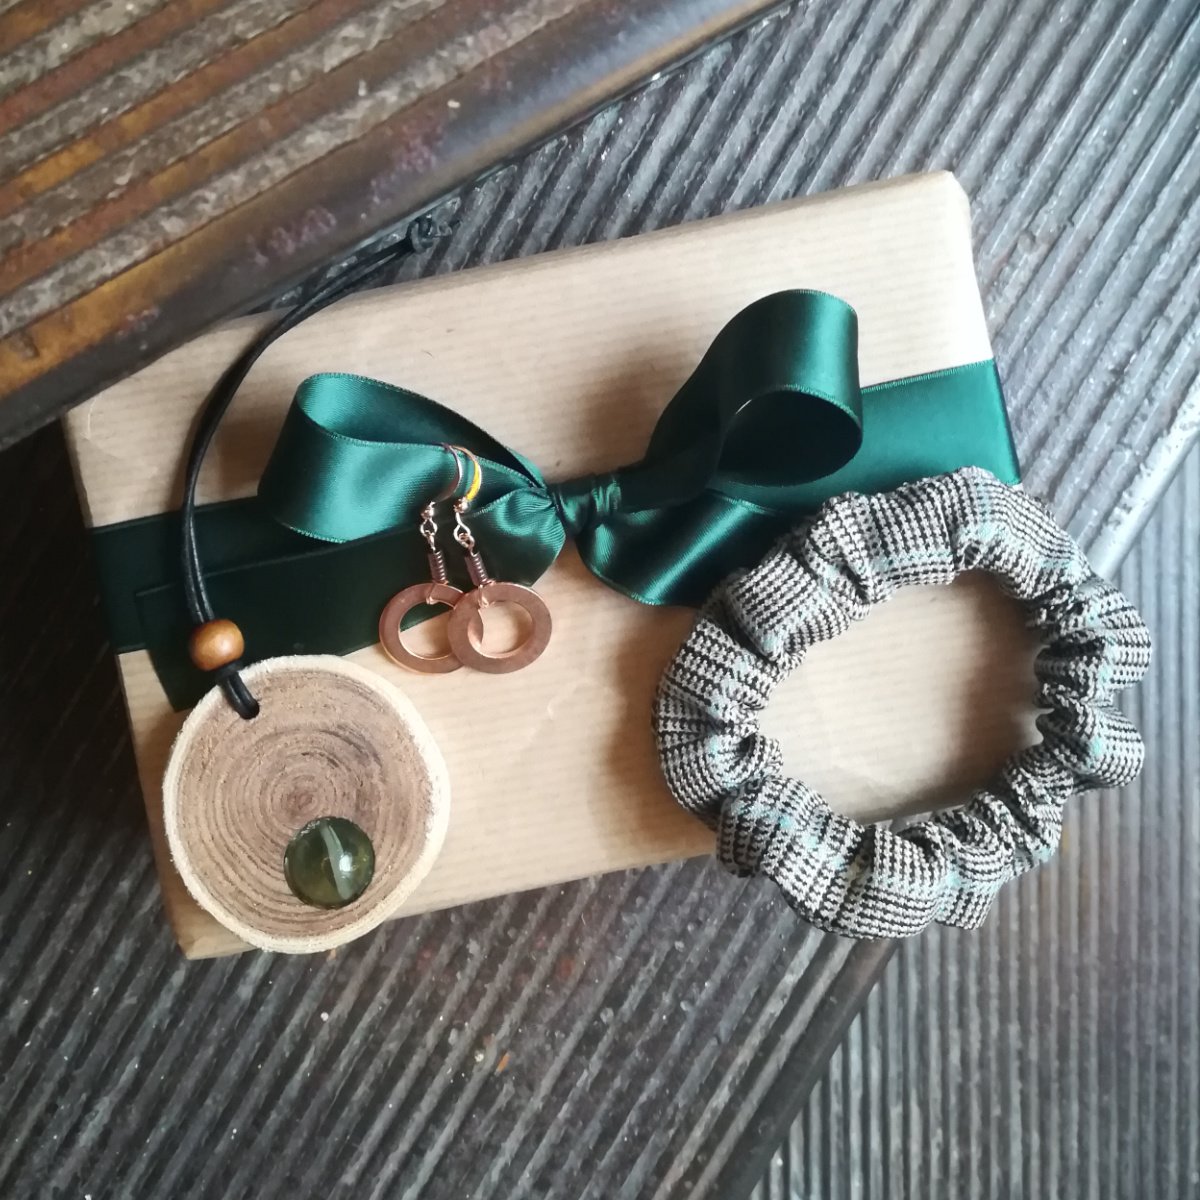 Gift set for Father Christmas consisting of scrunchy, earrings and tree ornaments